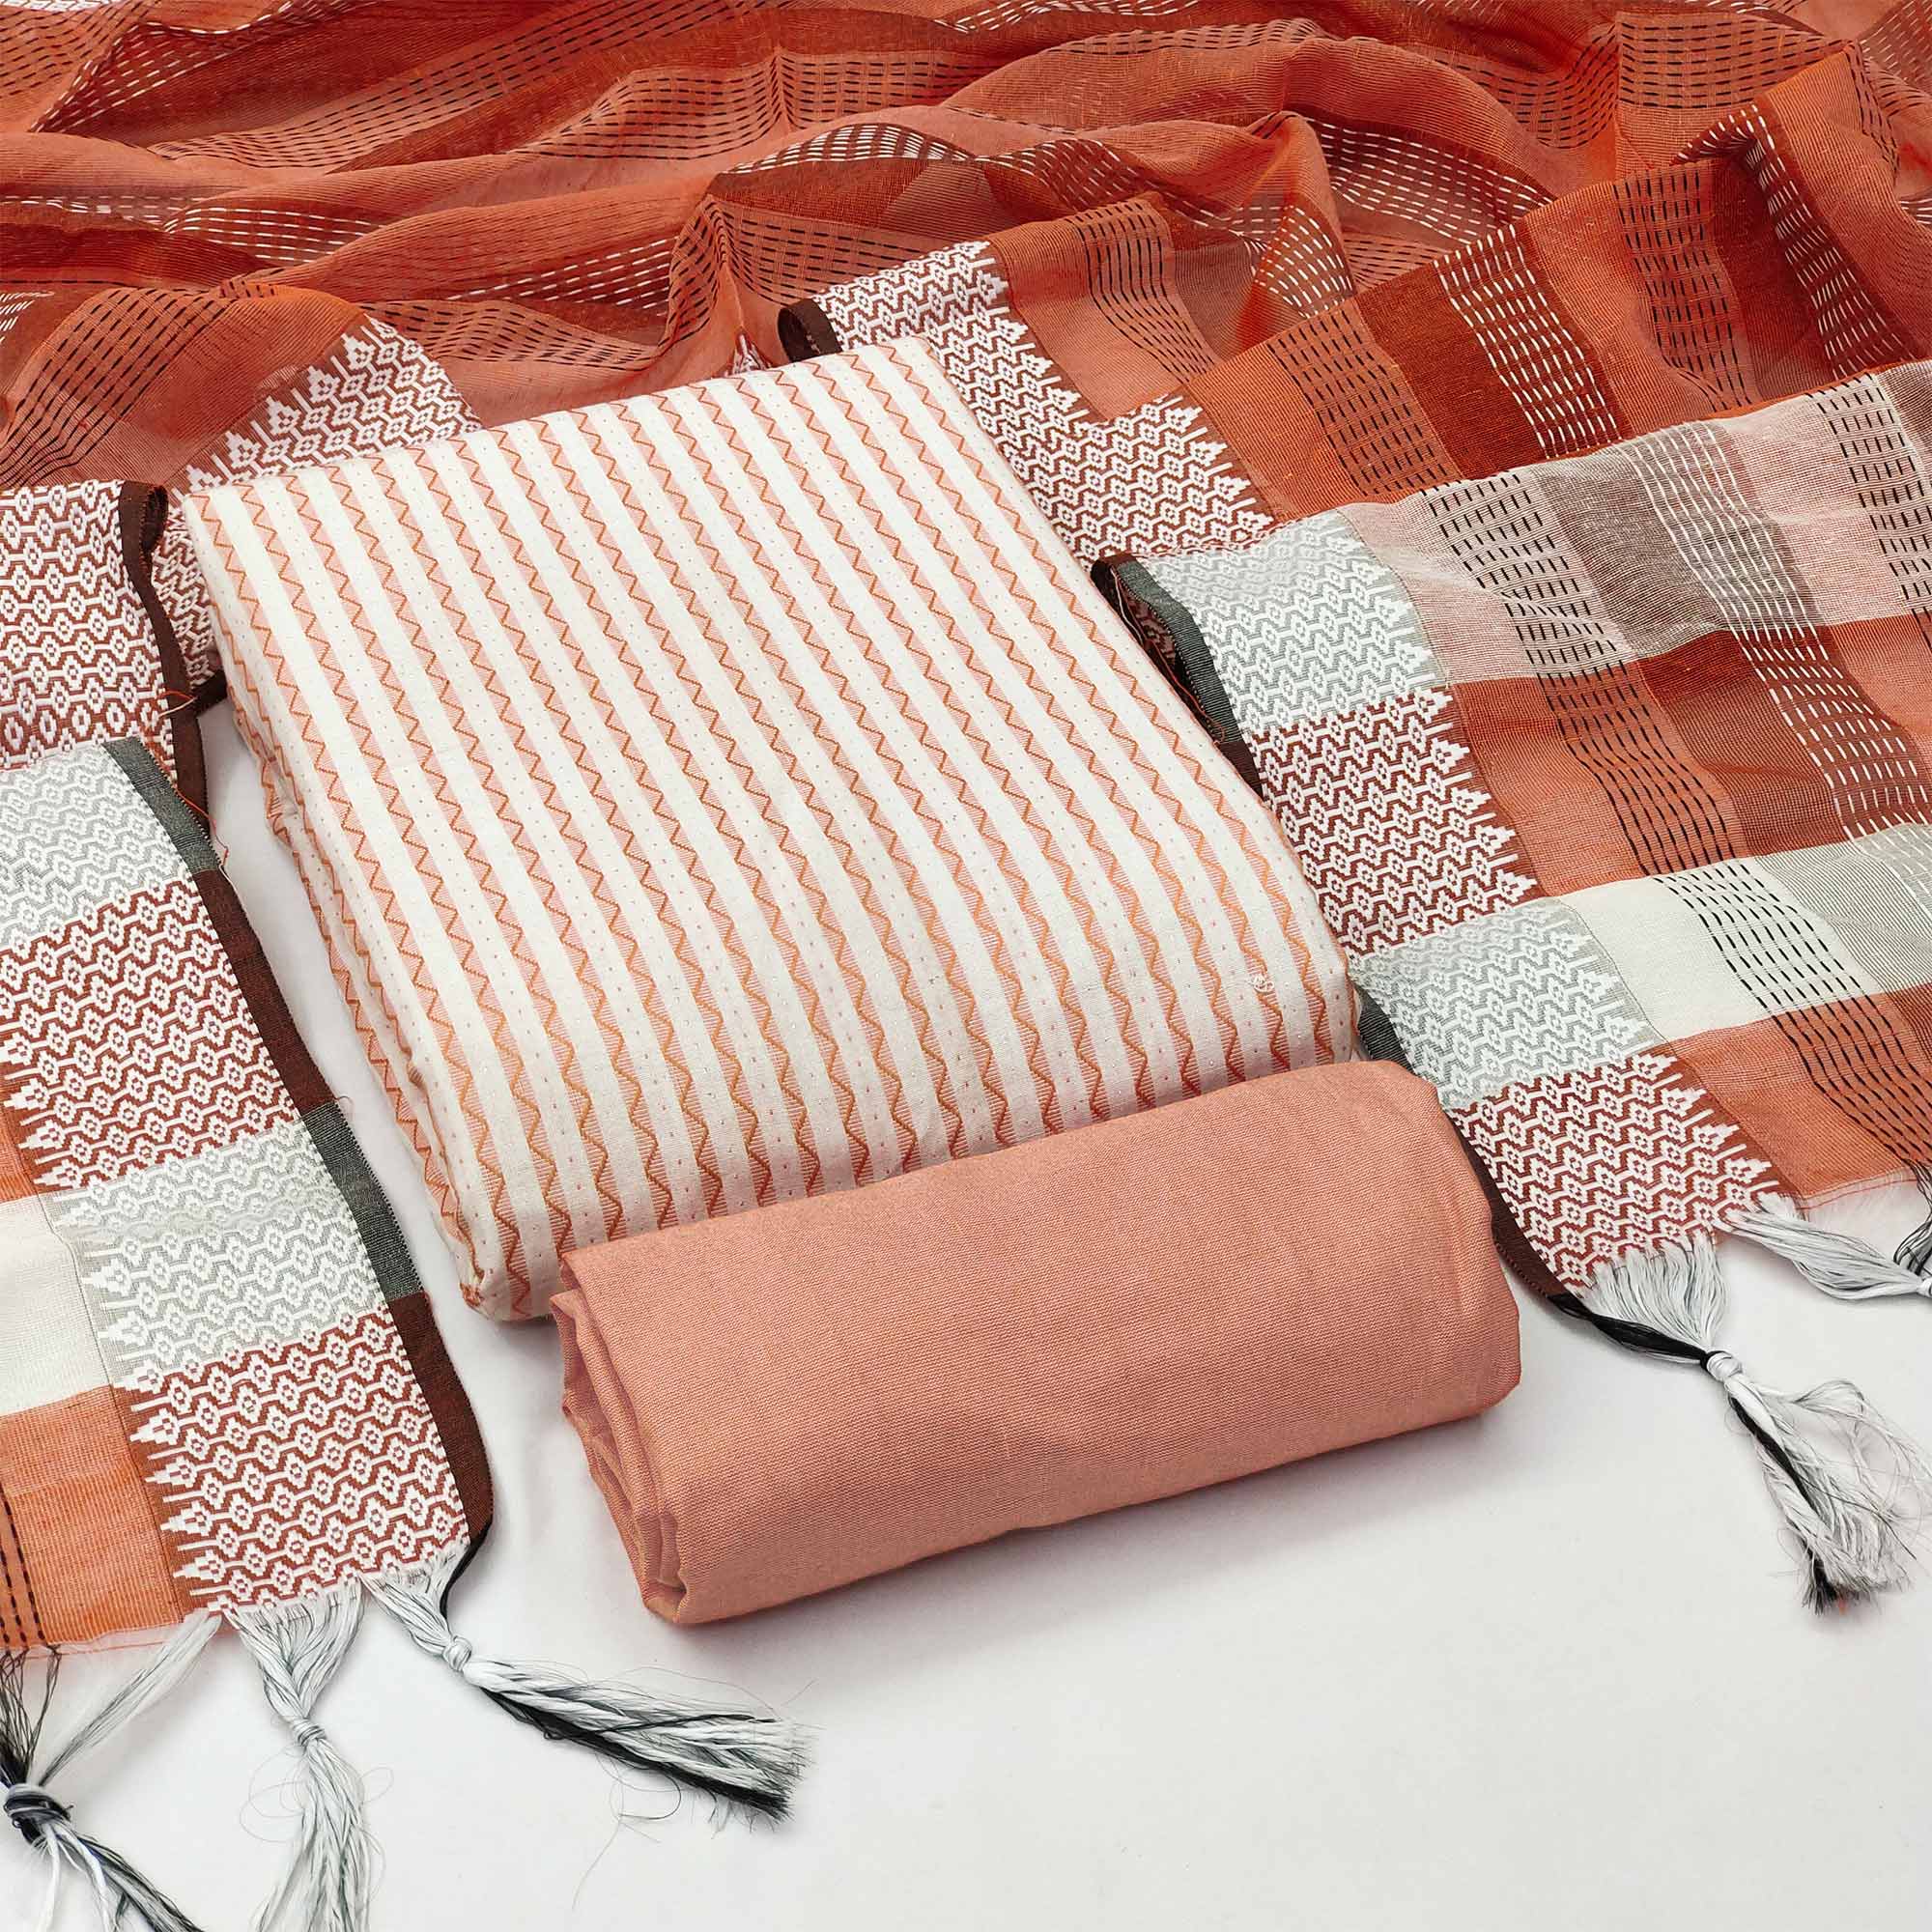 Peach Striped Printed With Woven Cotton Blend Dress Material